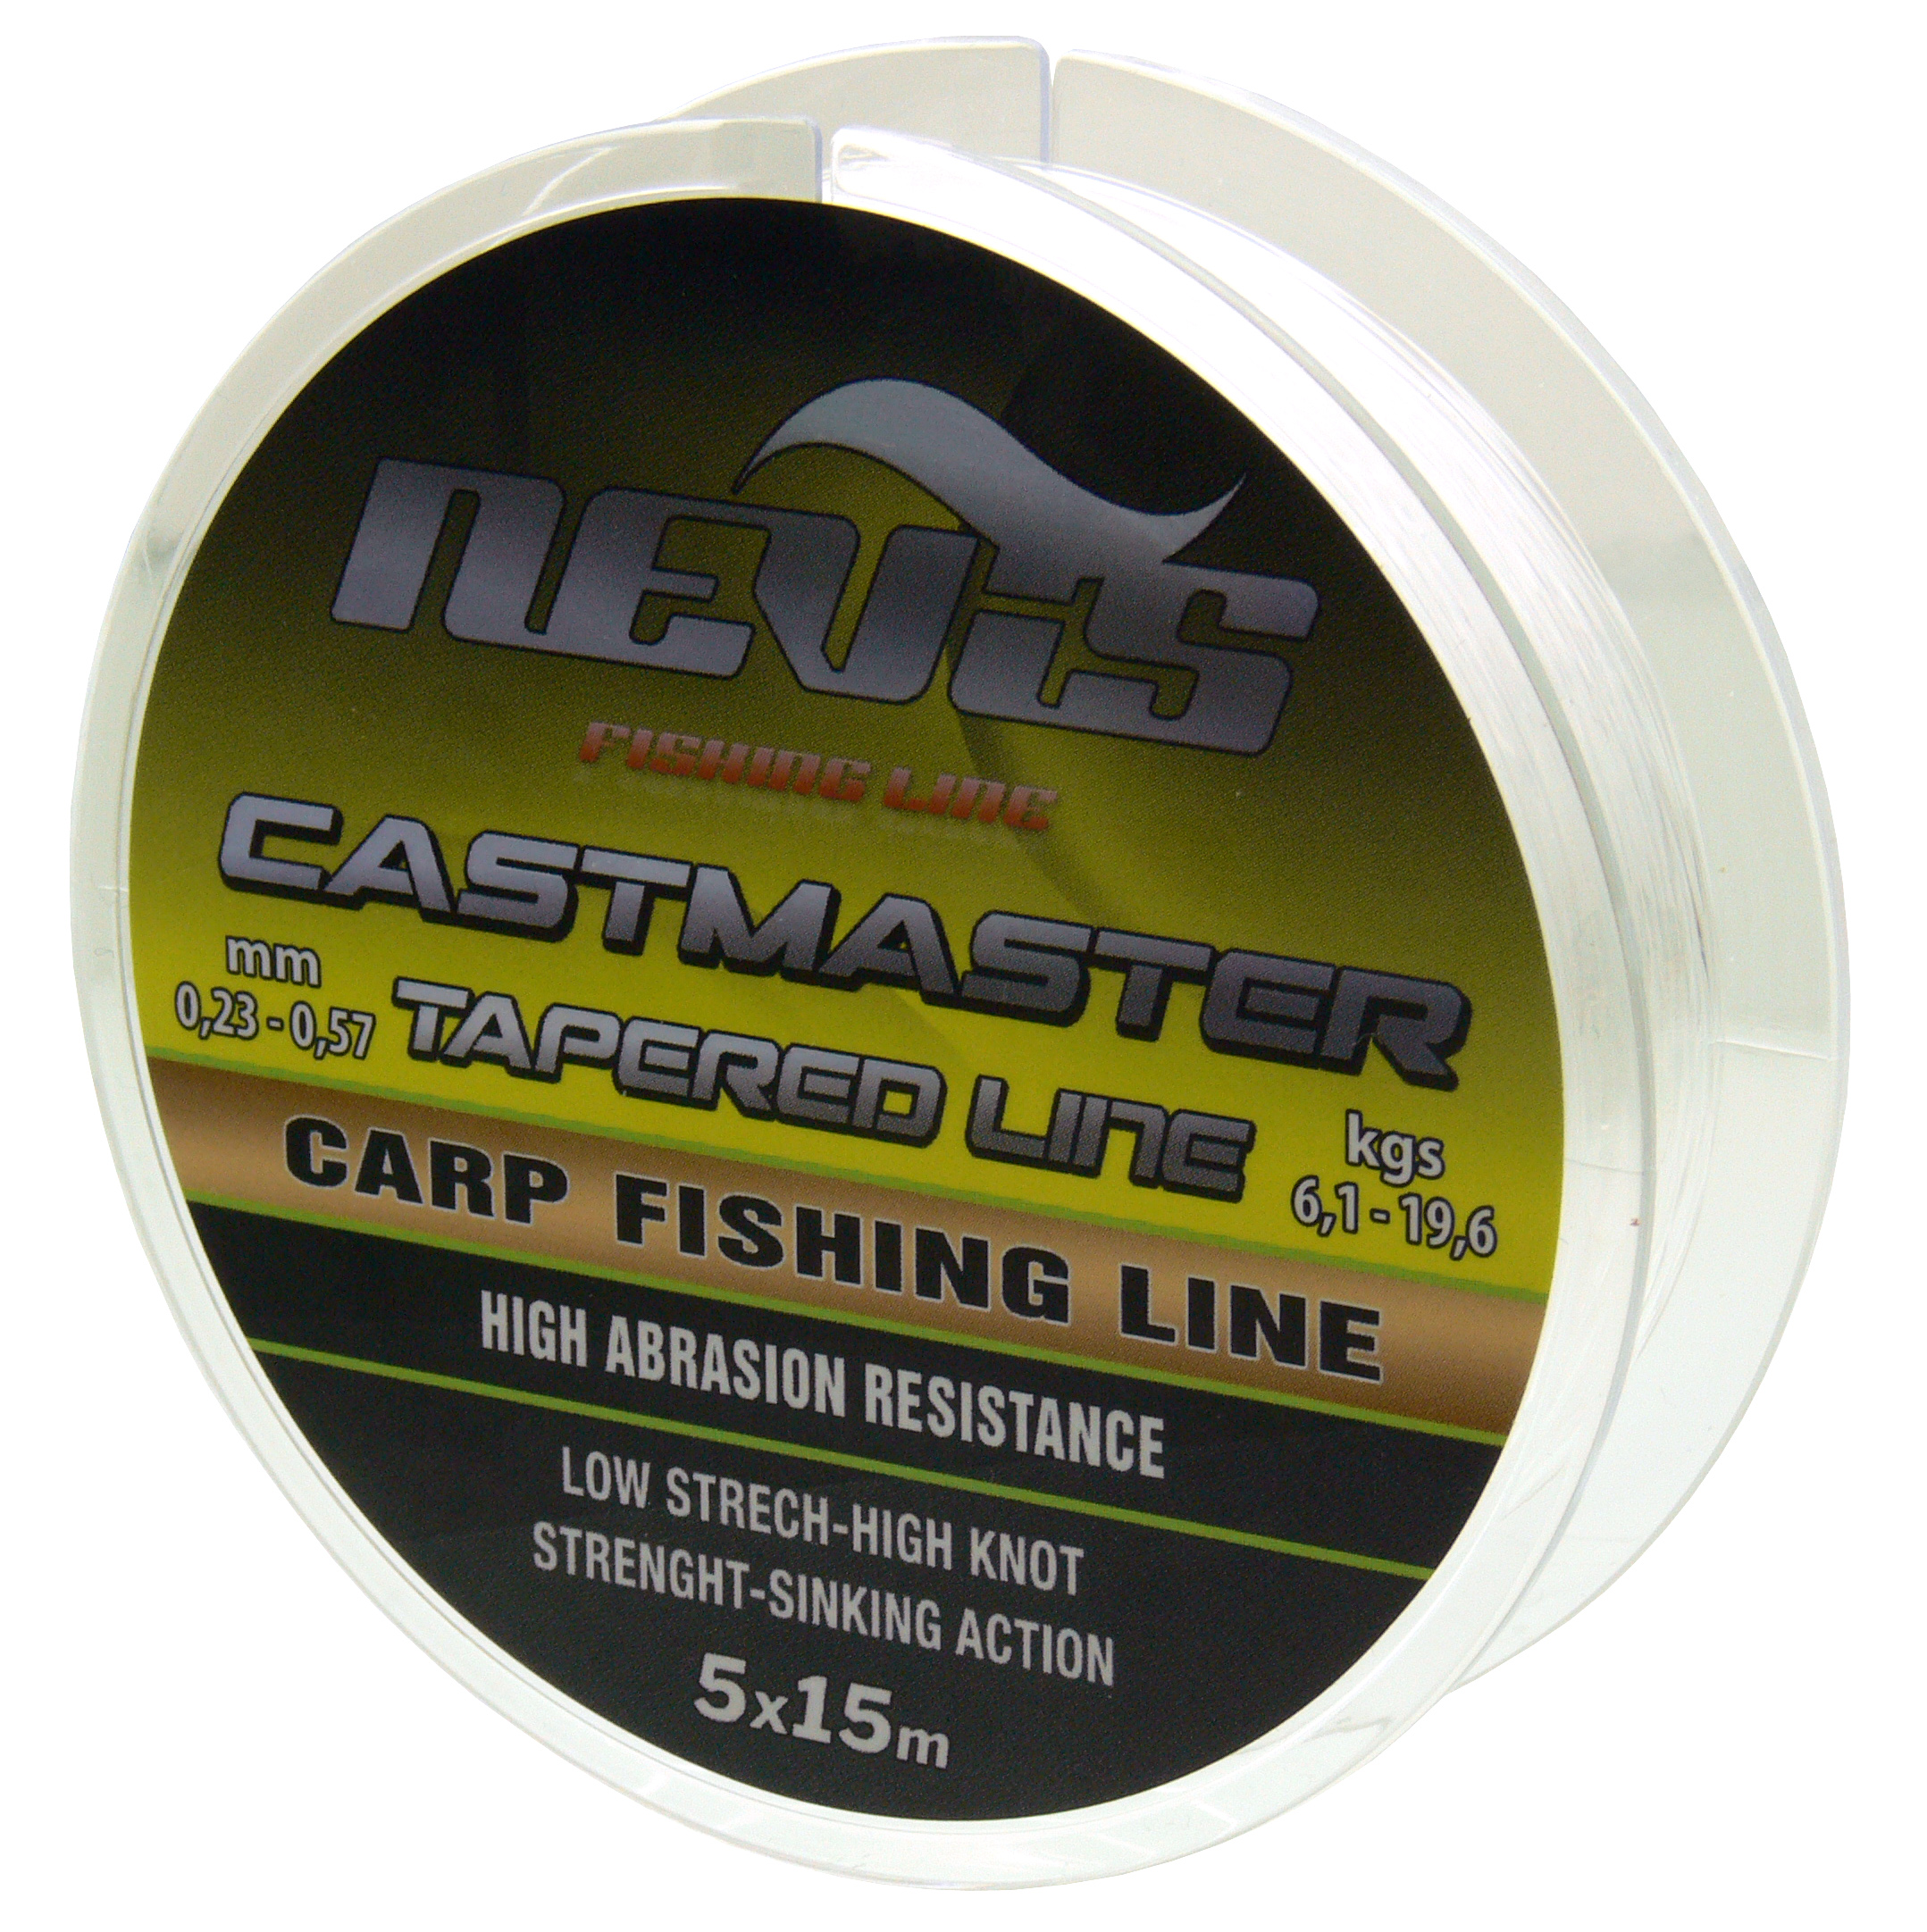 Nevis Castmaster Tapered Line 5x15m 3247-0..